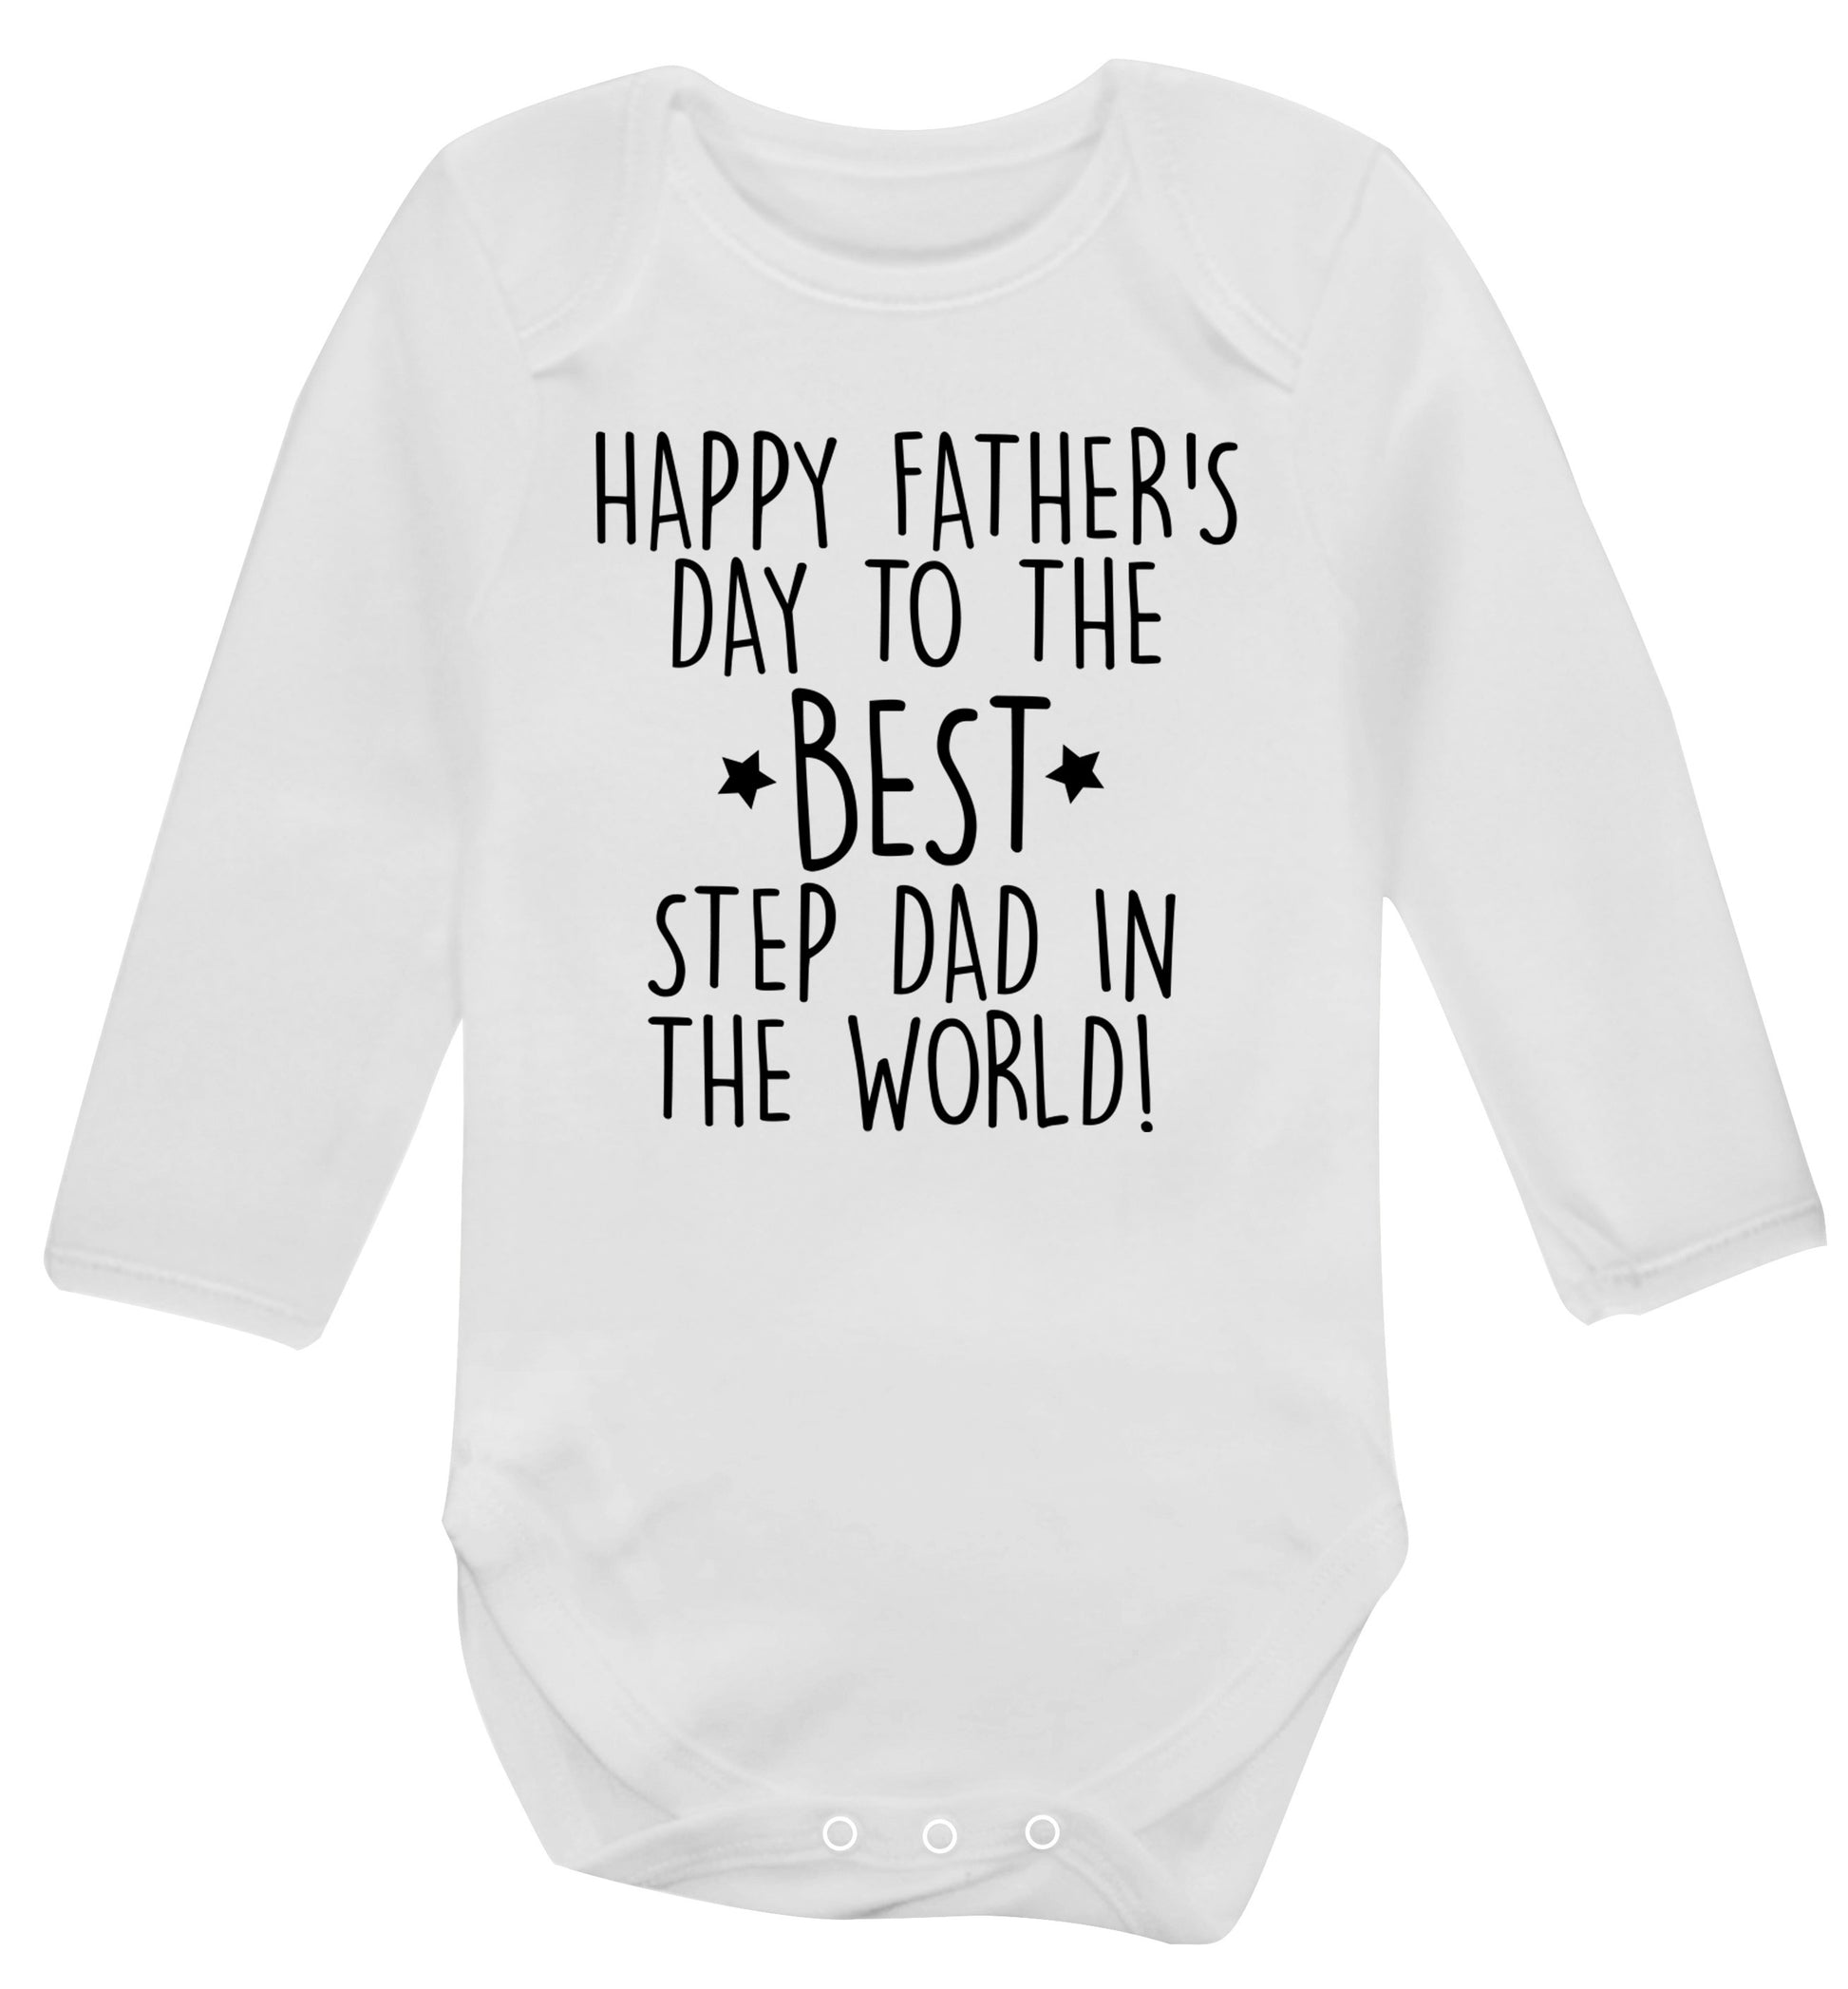 Happy Father's day to the best step dad in the world! Baby Vest long sleeved white 6-12 months